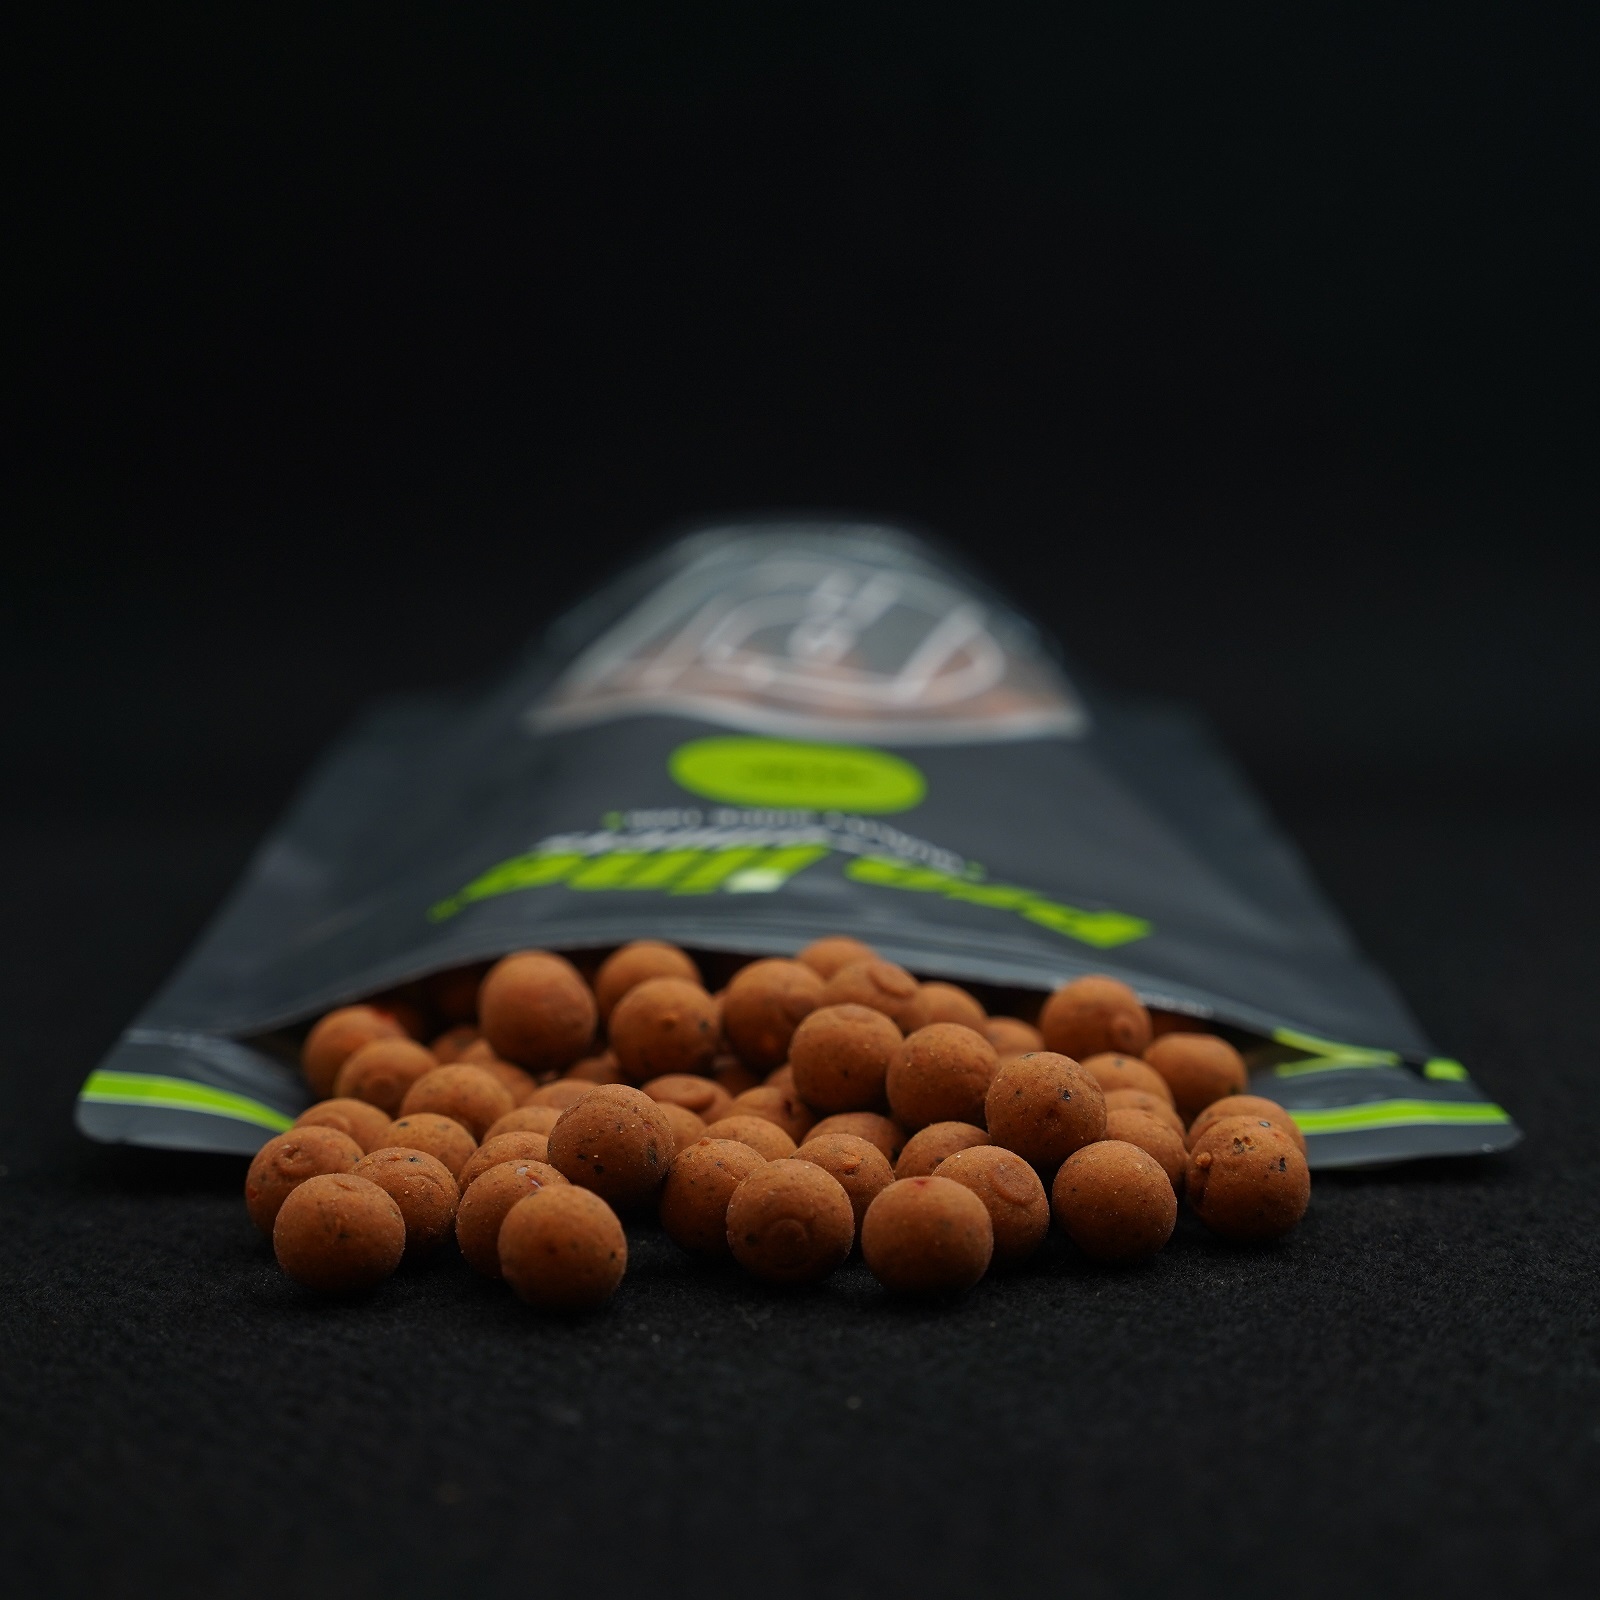 Pro Line Readymades Spicy Squid & Cream Boilies (2.5kg)